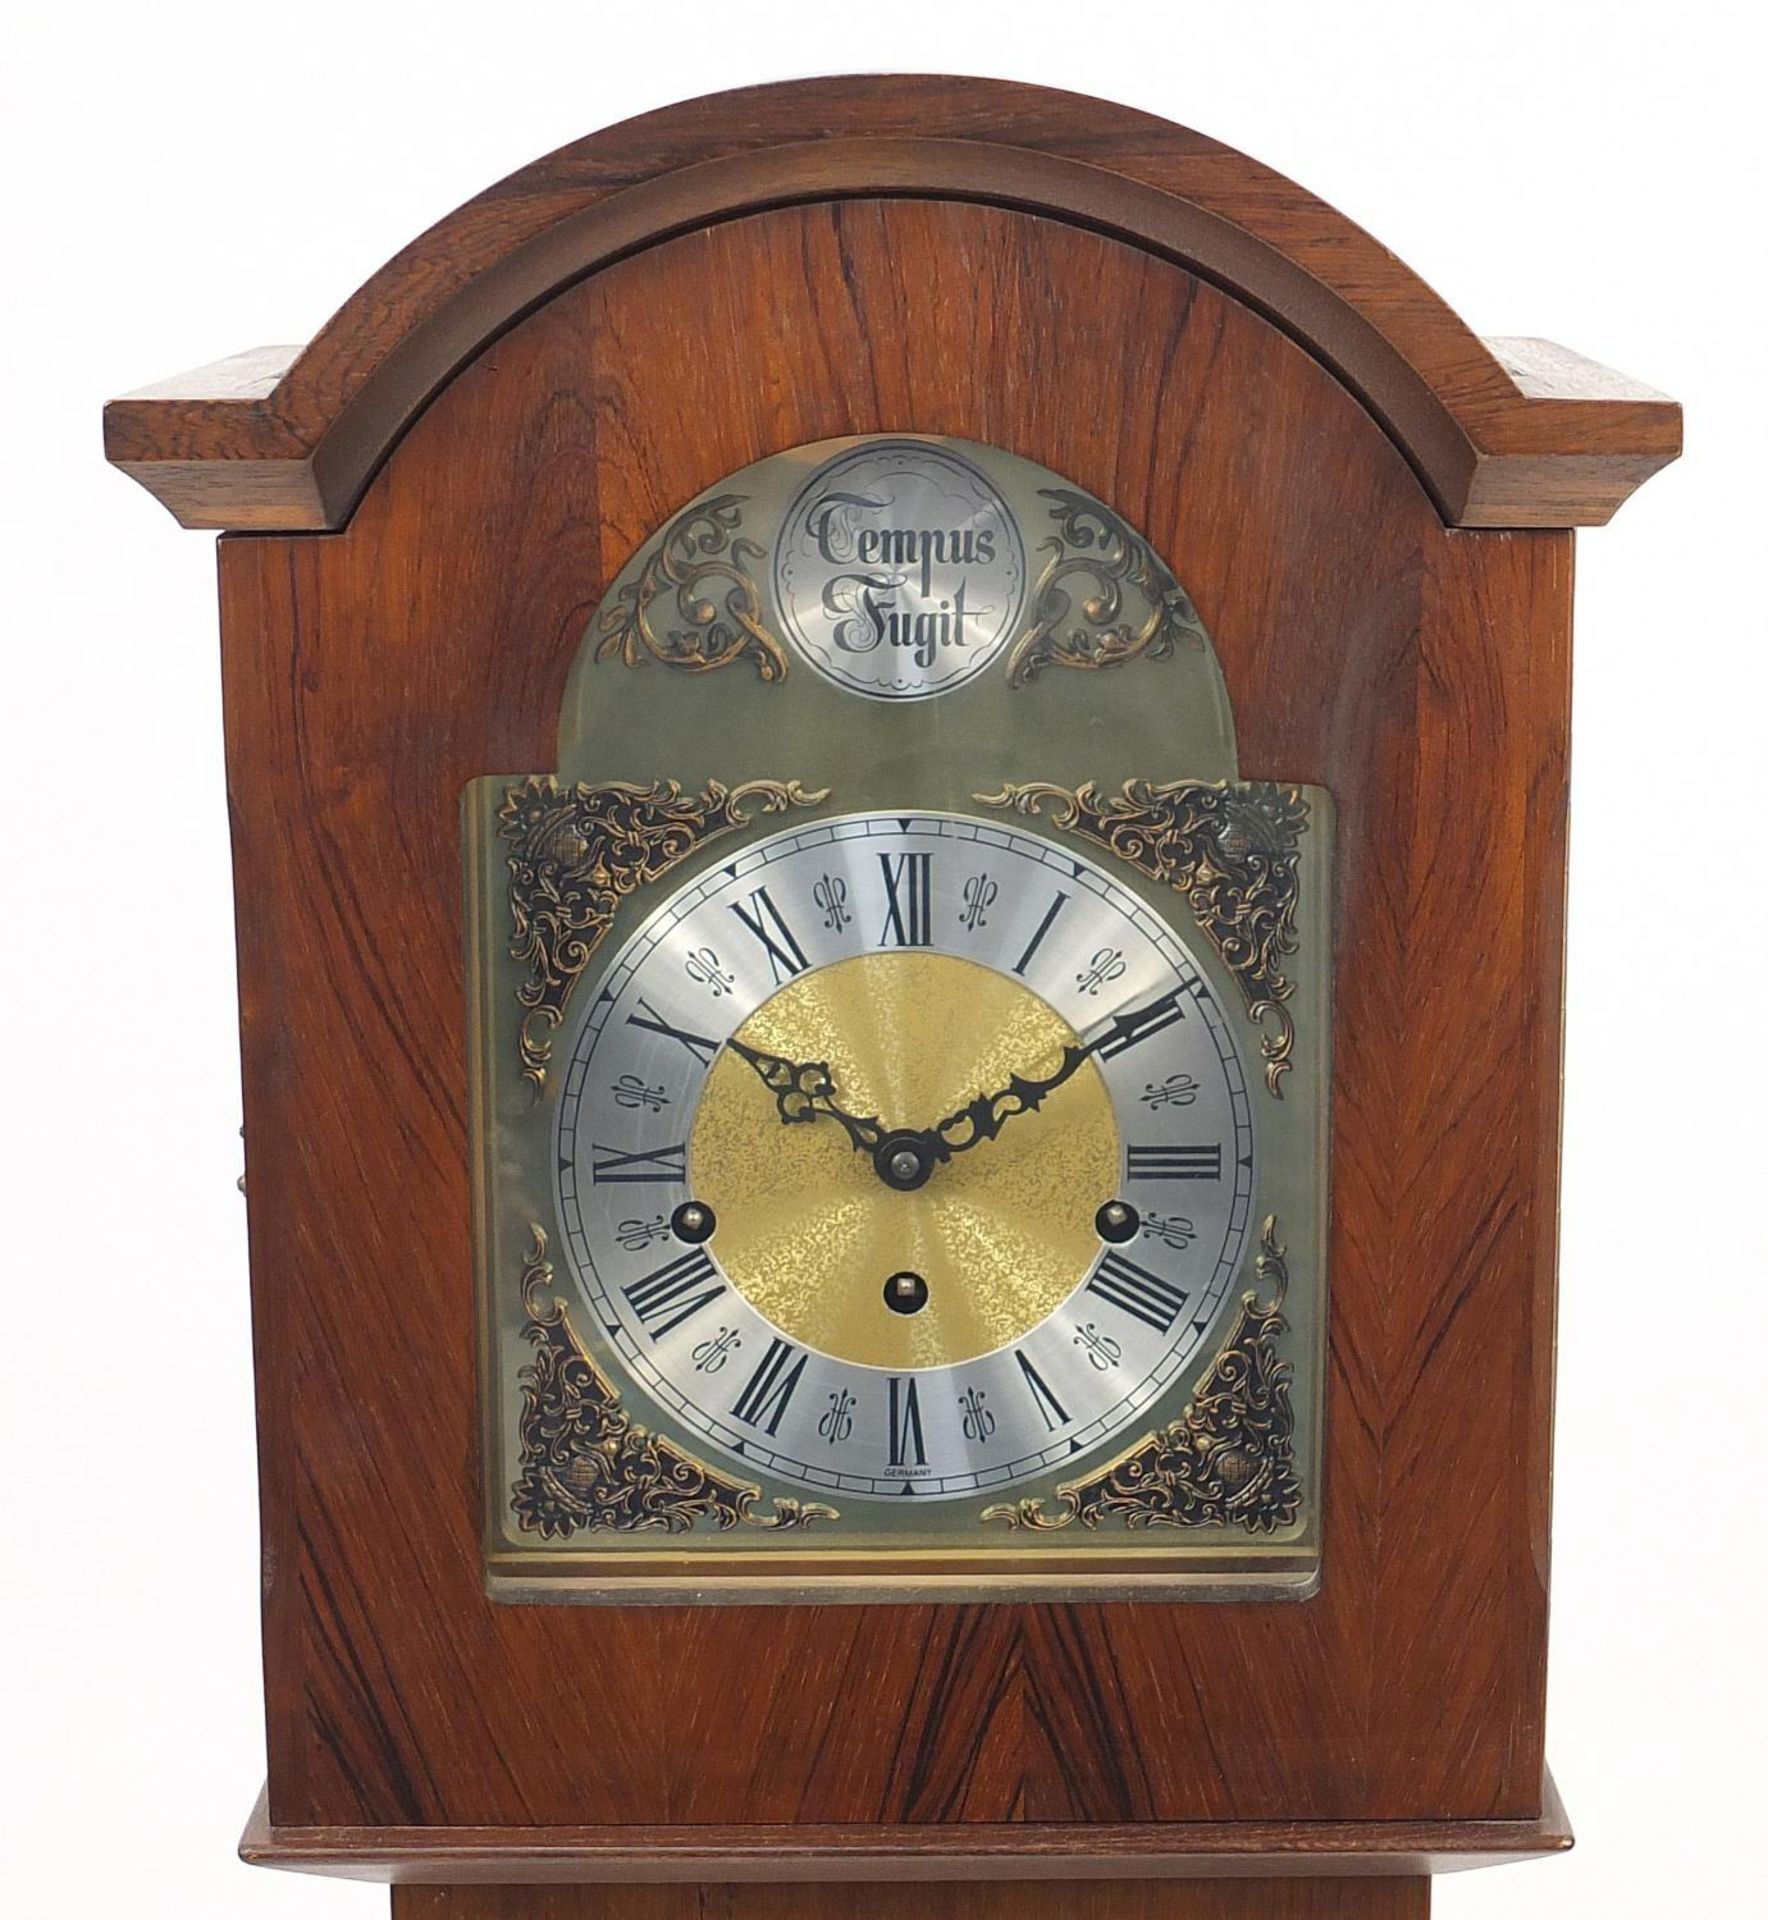 Tempest Fugit granddaughter clock with visible weights and pendulum, 149cm high - Image 2 of 8